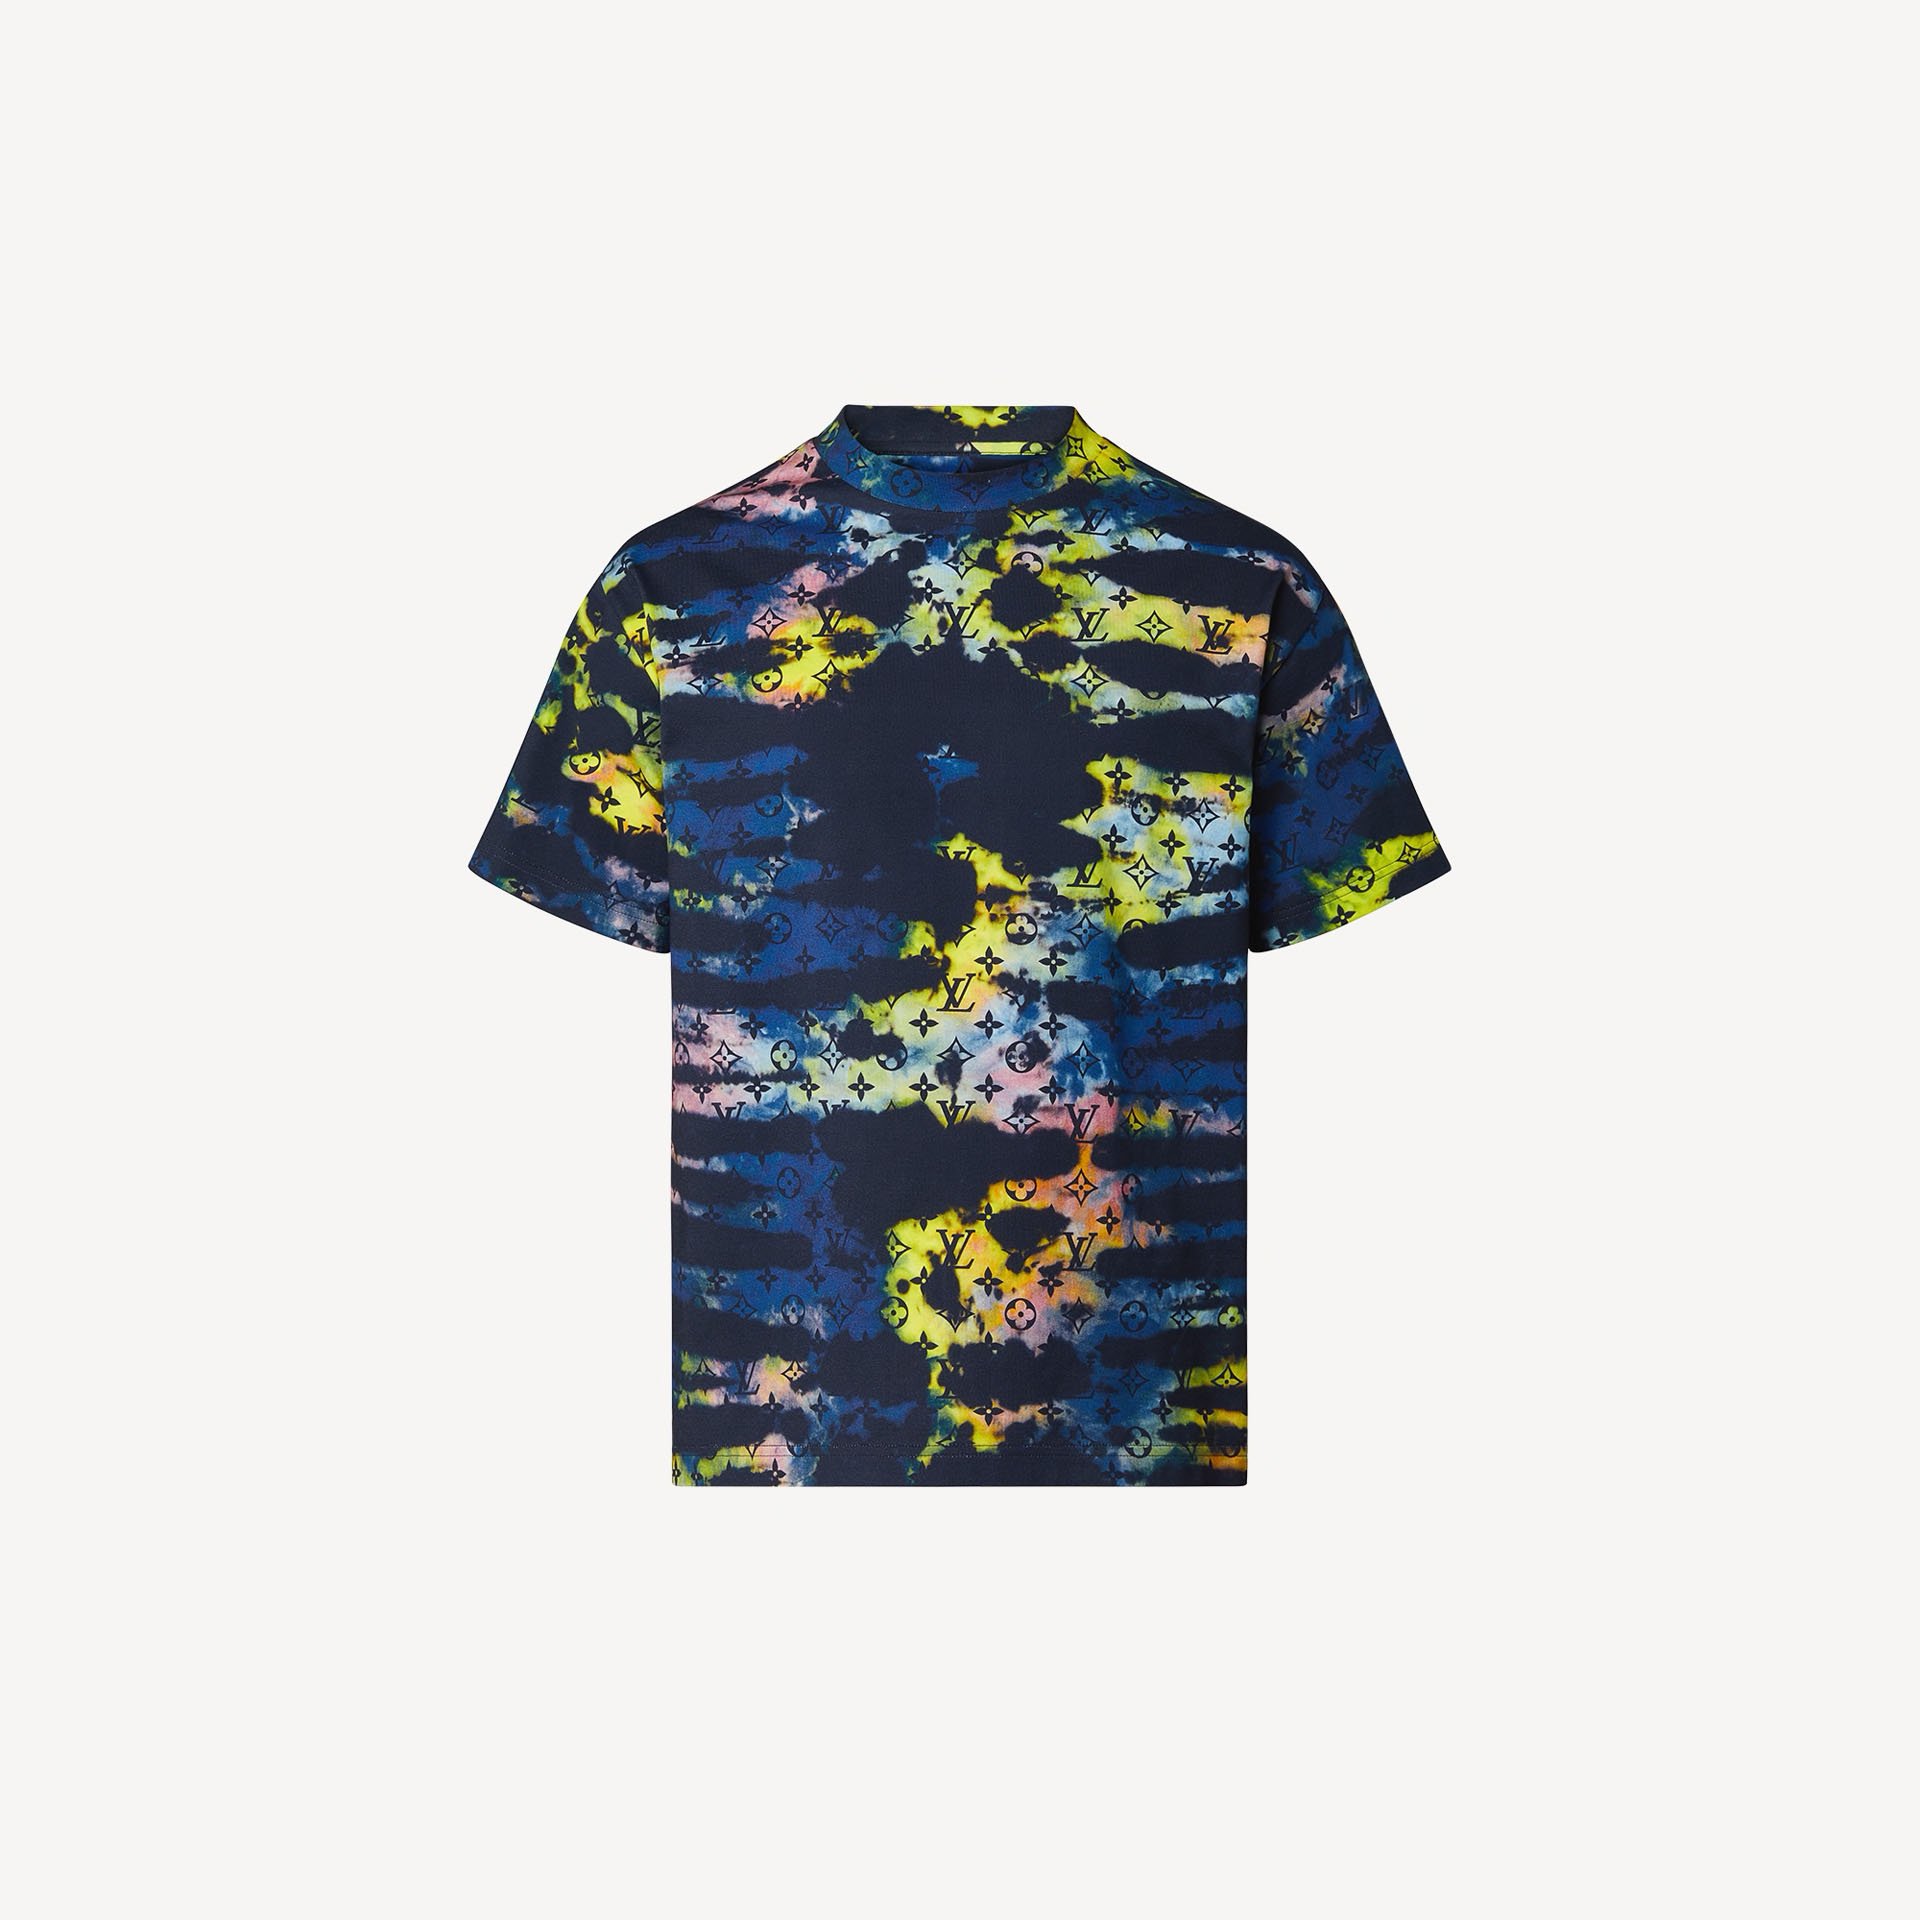 Louis Vuitton Outer Space PlanetsLogo Prints All Over Tee Luxury Apparel  on Carousell